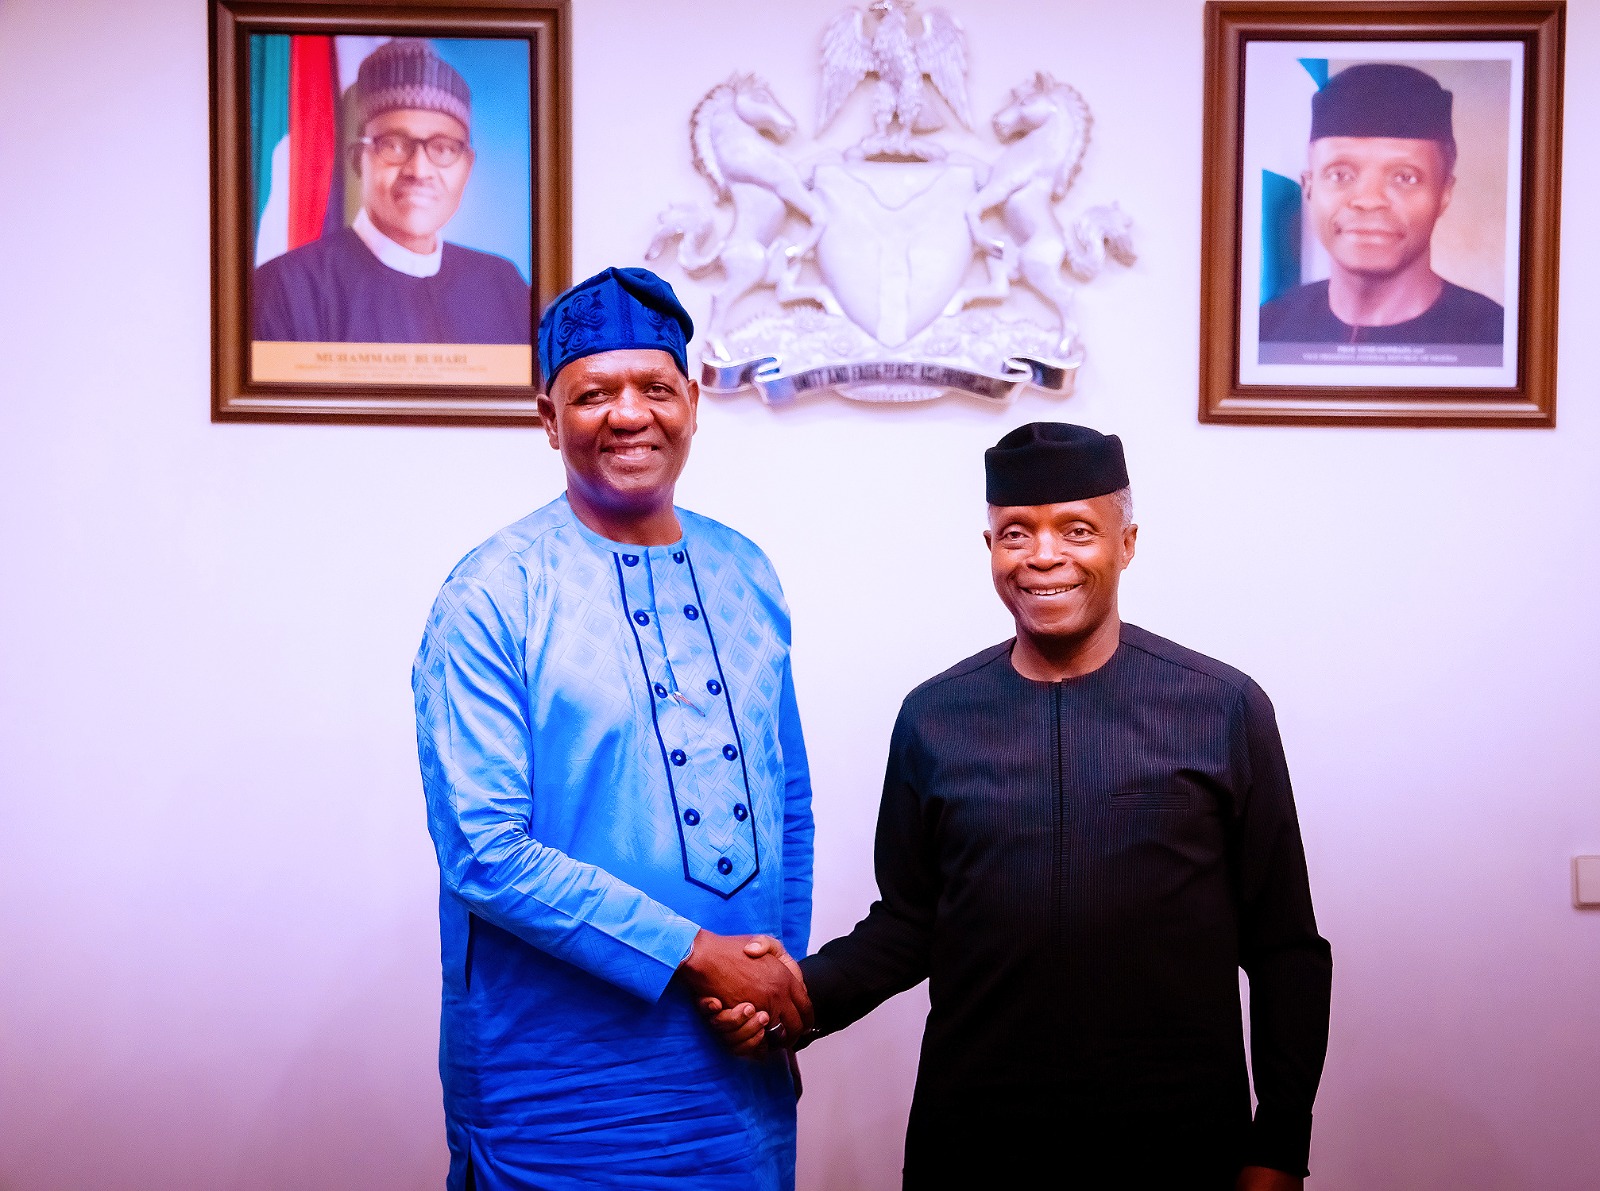 VP Osinbajo Receives The Director General Of The Small & Medium Enterprises Development Agency (SMEDAN), Mr Olawale Tunde Fasanya At The State House On 03/04/2023